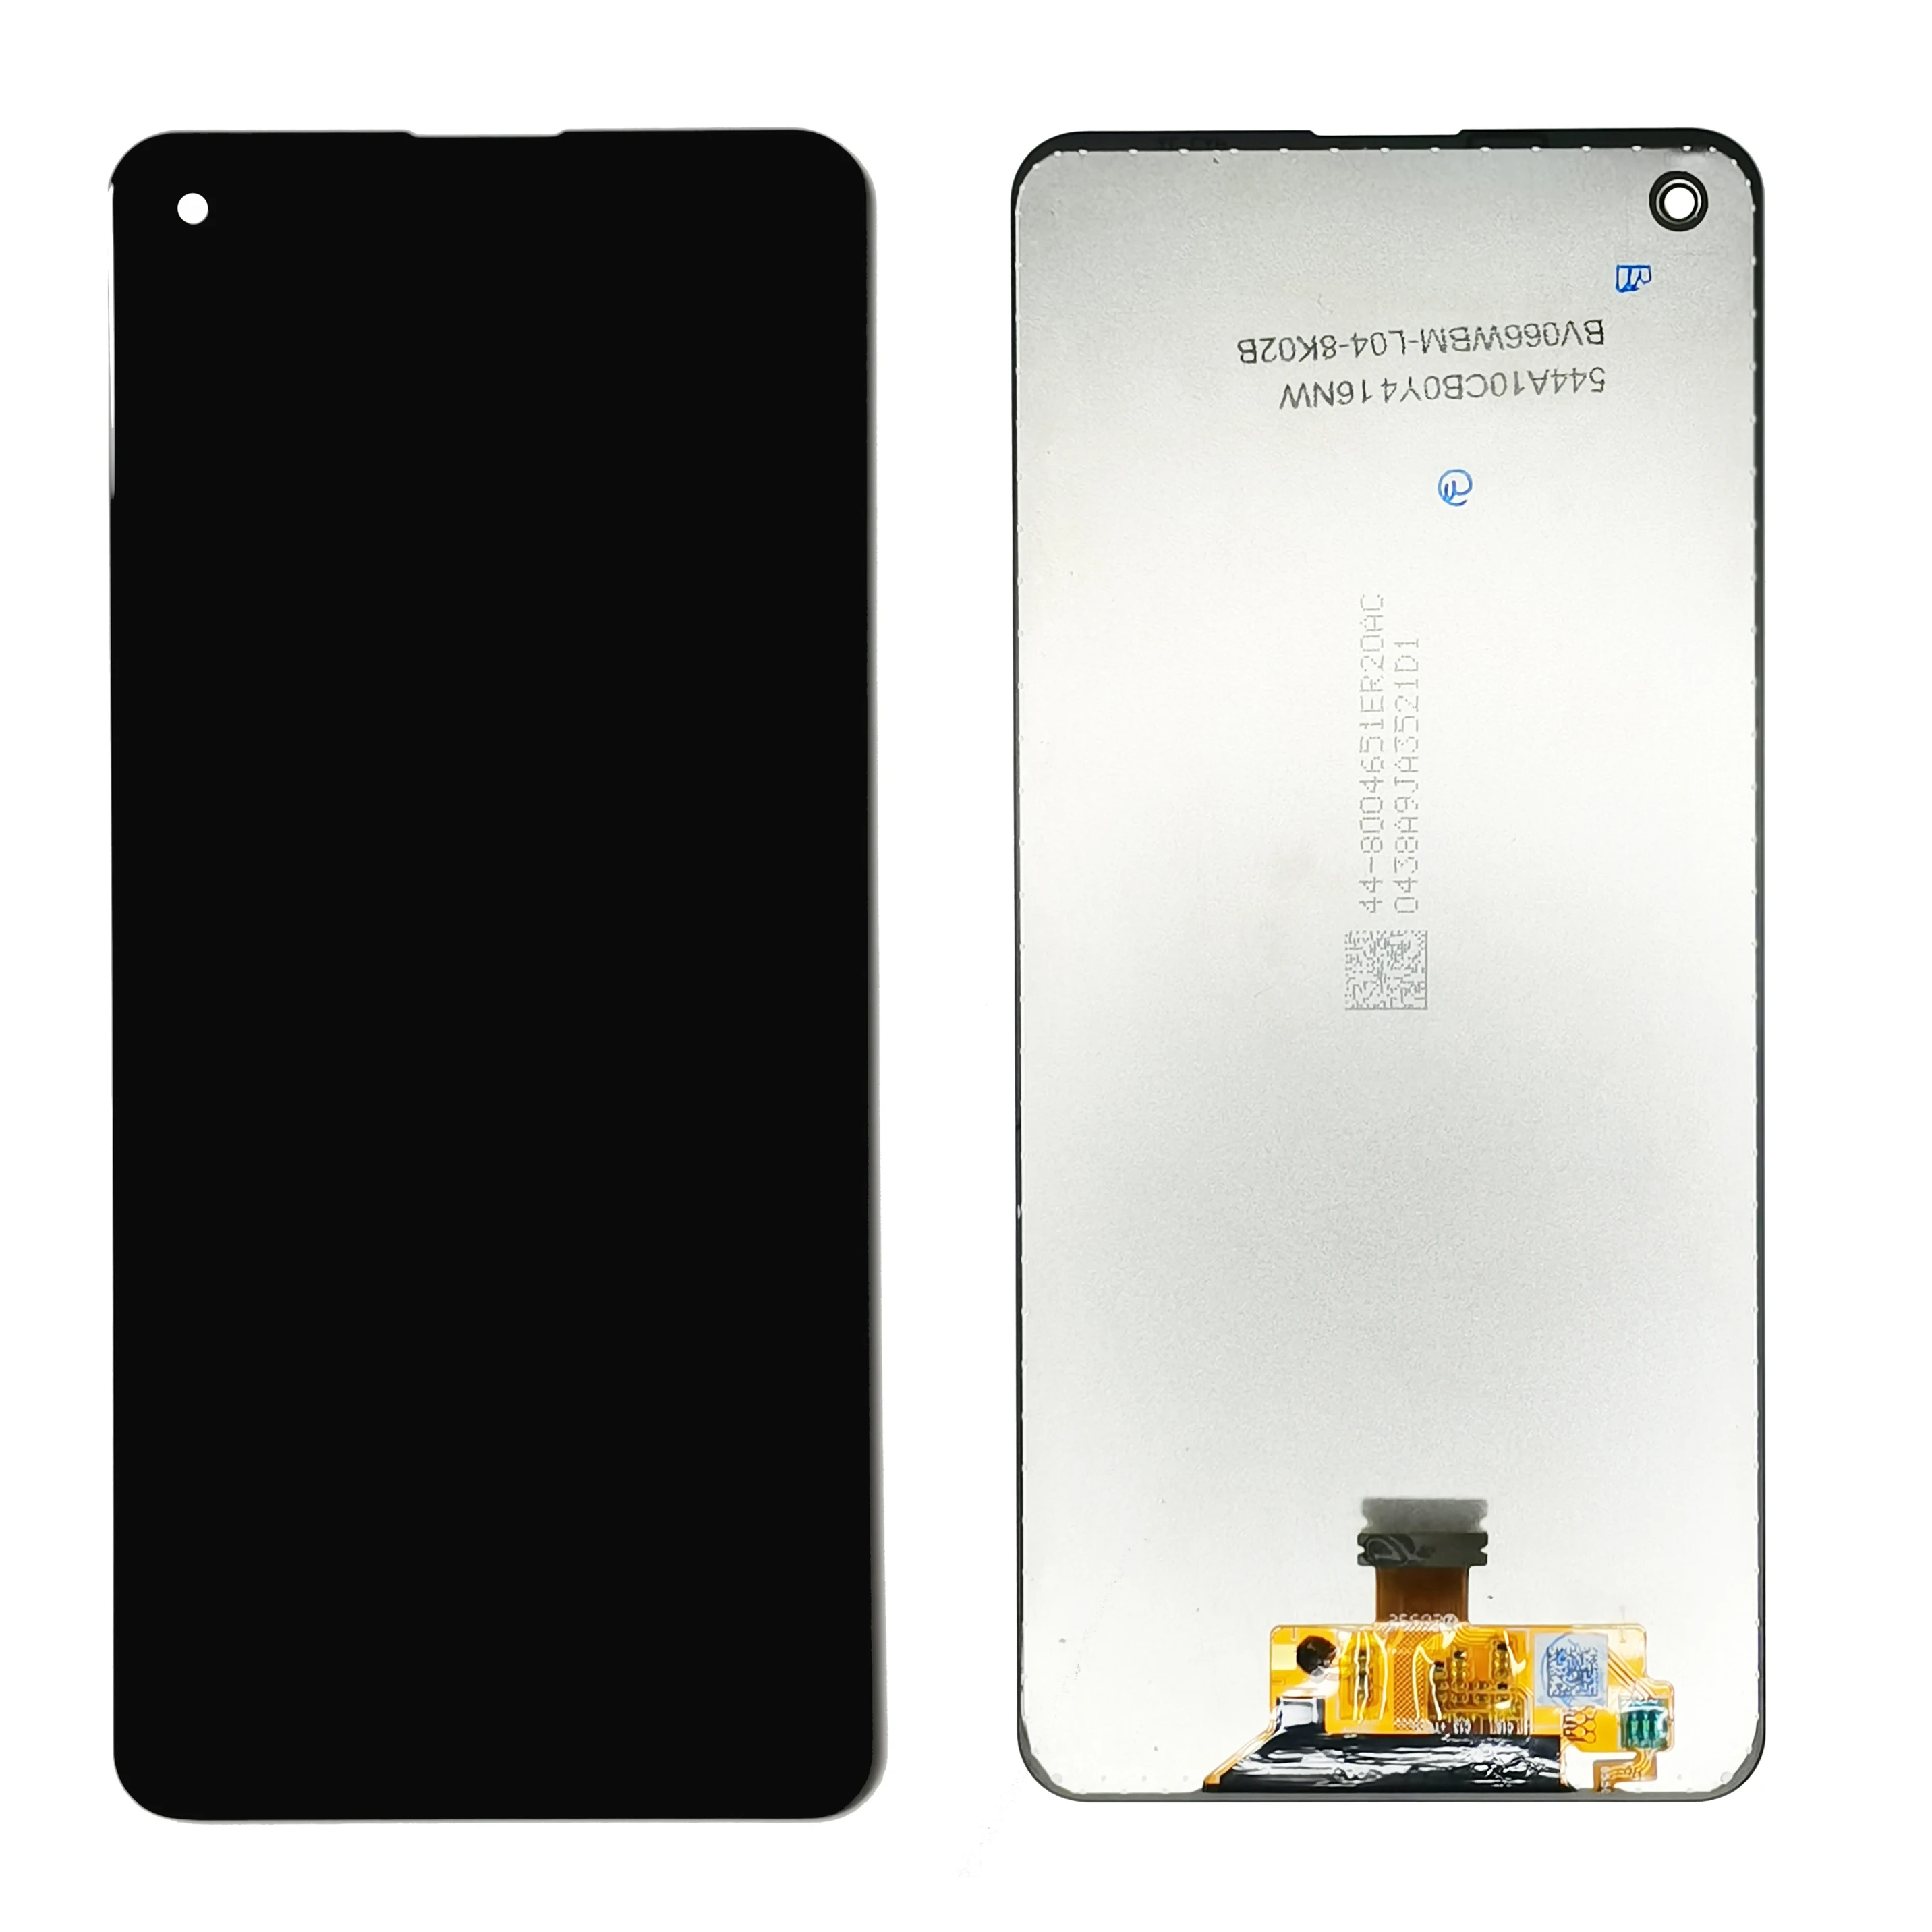 6.5" LCD For Samsung Galaxy A21s A217 A217F LCD Touch Screen Digitizer For Samsung A21s SM-A217F/DS Display Replacement Repair